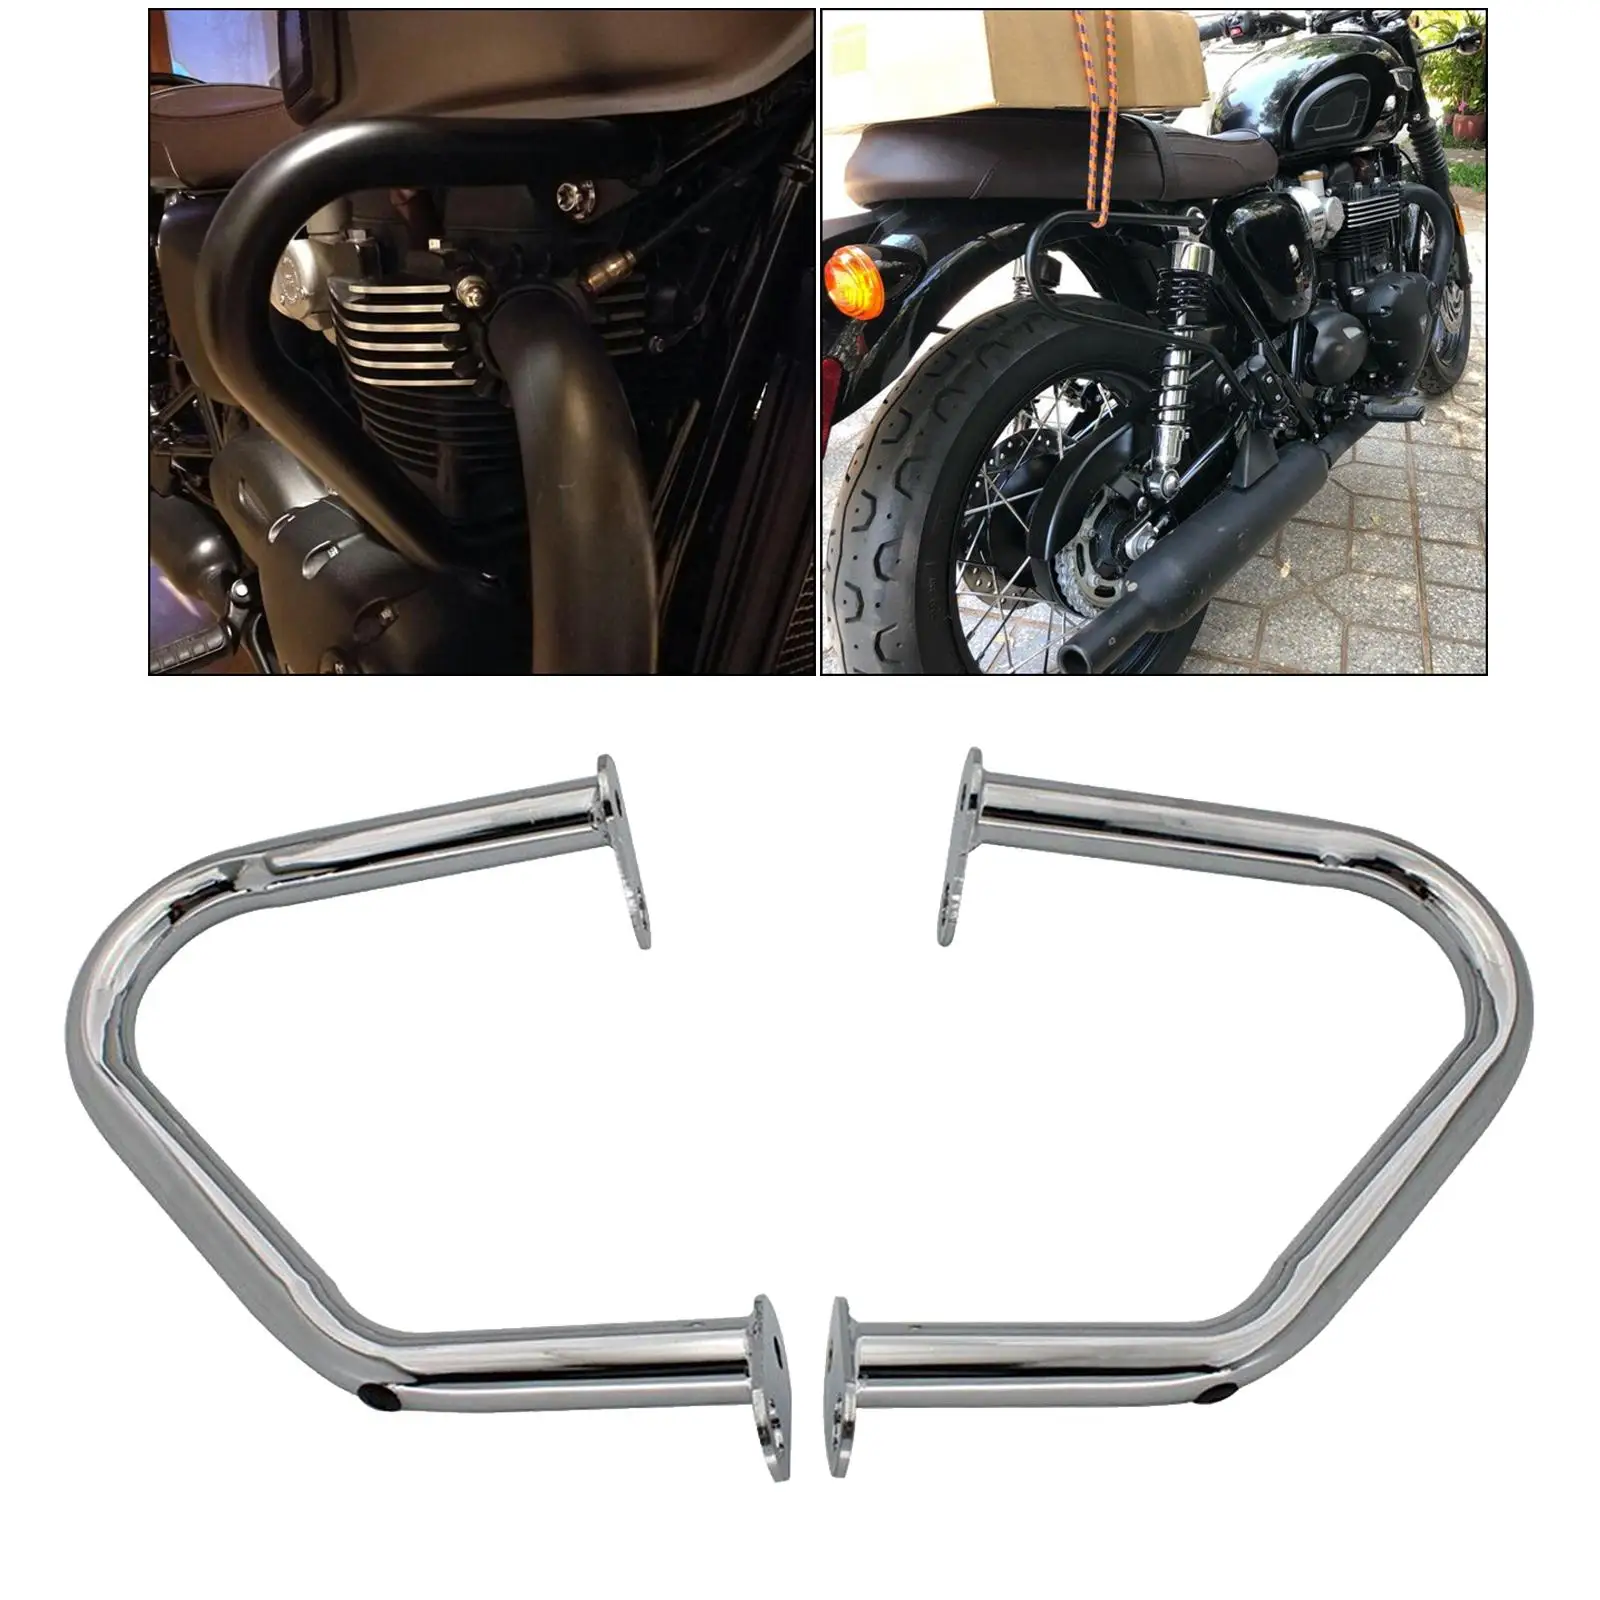 2pcs Motorcycle Bumper Engine Guard Frame Protector for 